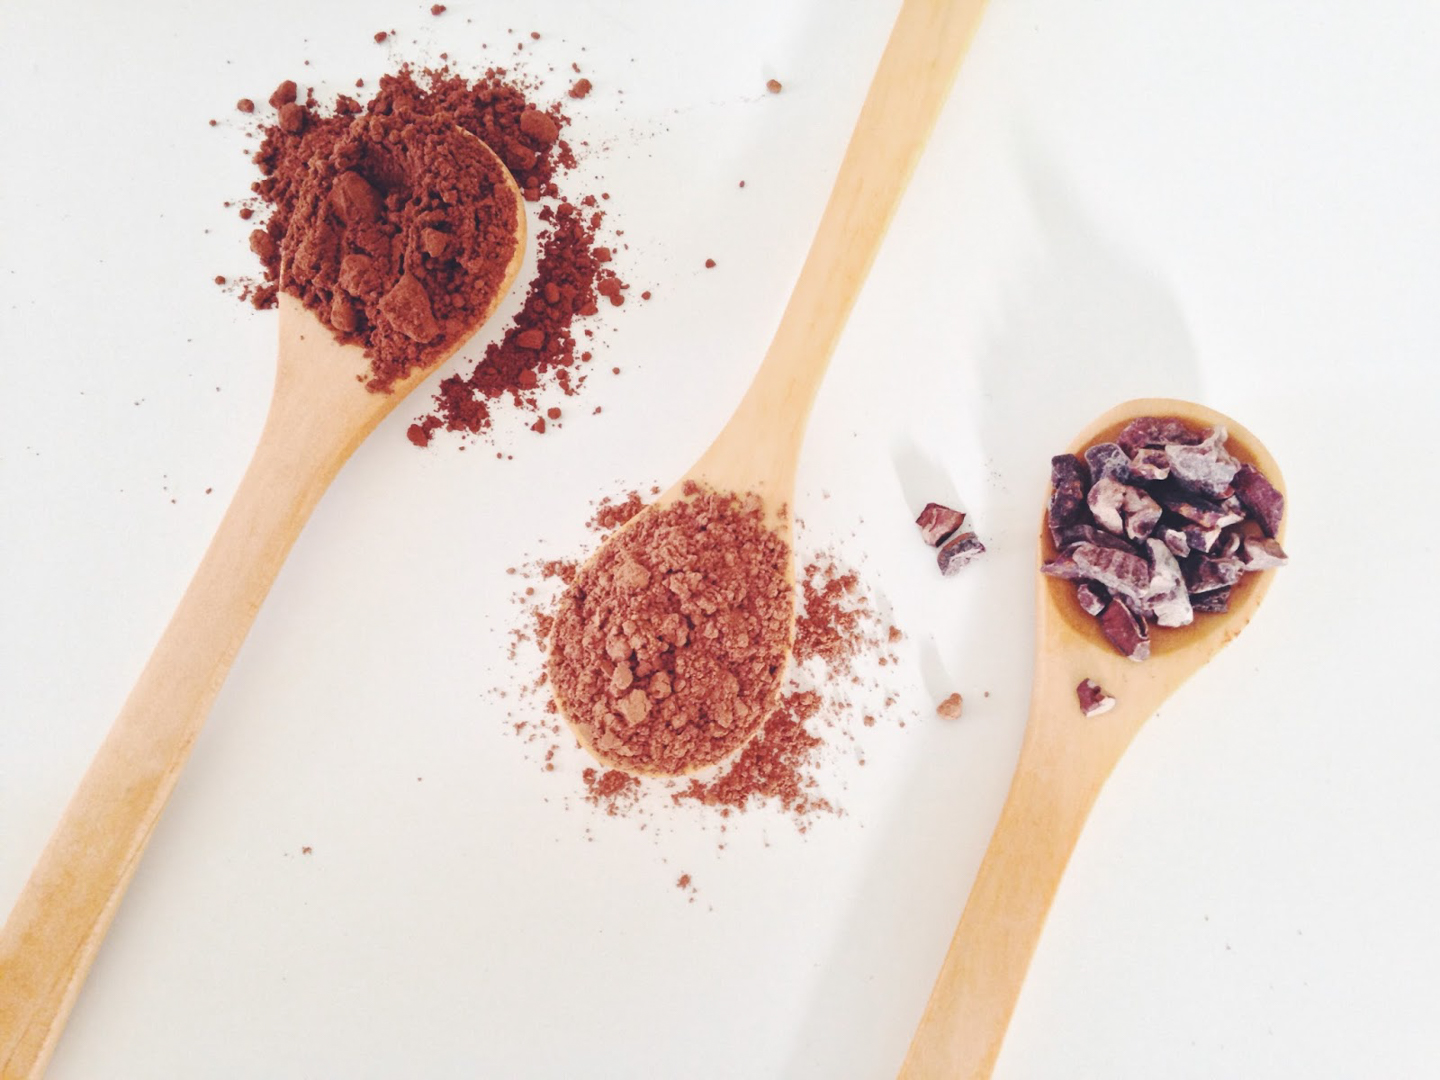 Three wooden spoons with cocoa powder, cacao powder, and cacao nibs